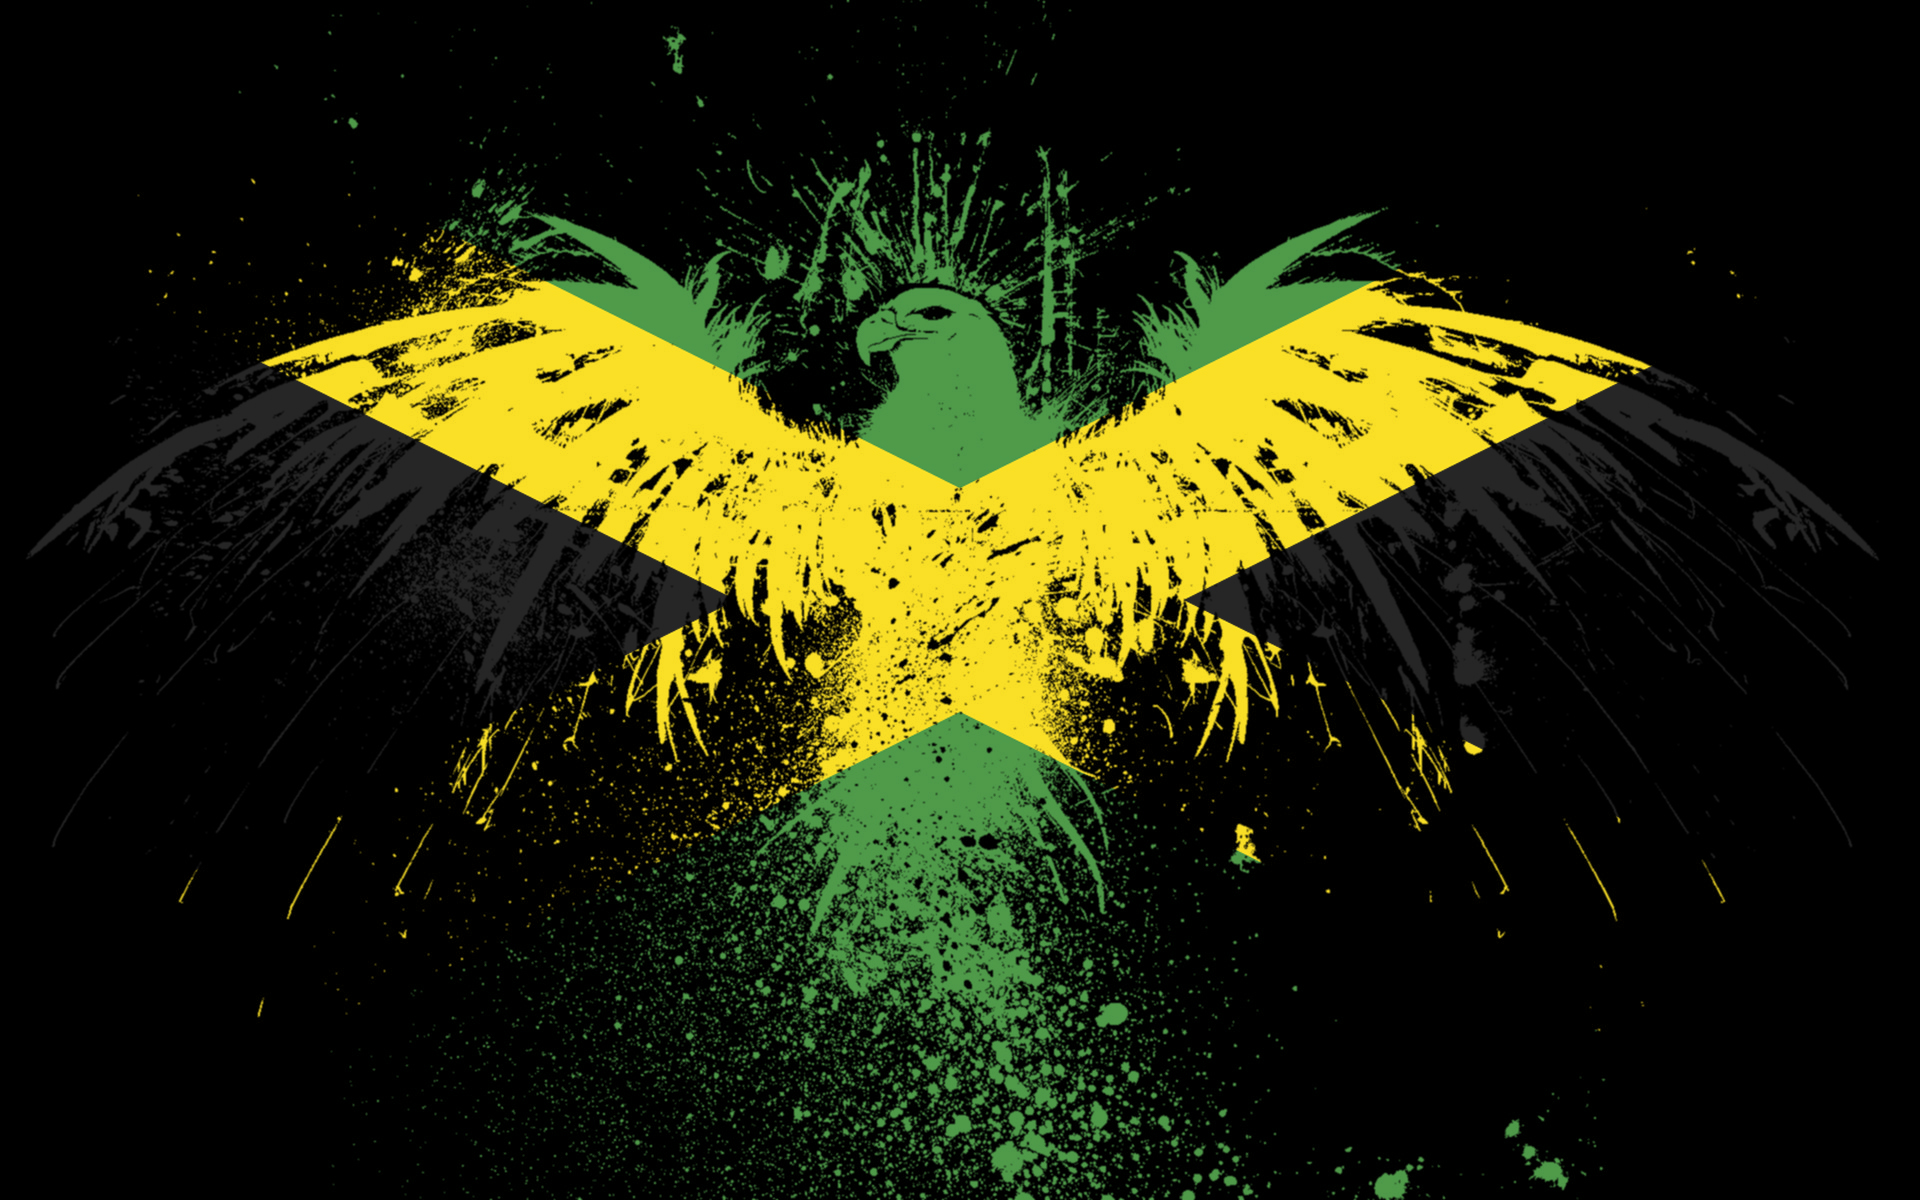 The Jamaican S Is A Website That Provides Articles On Variety Of